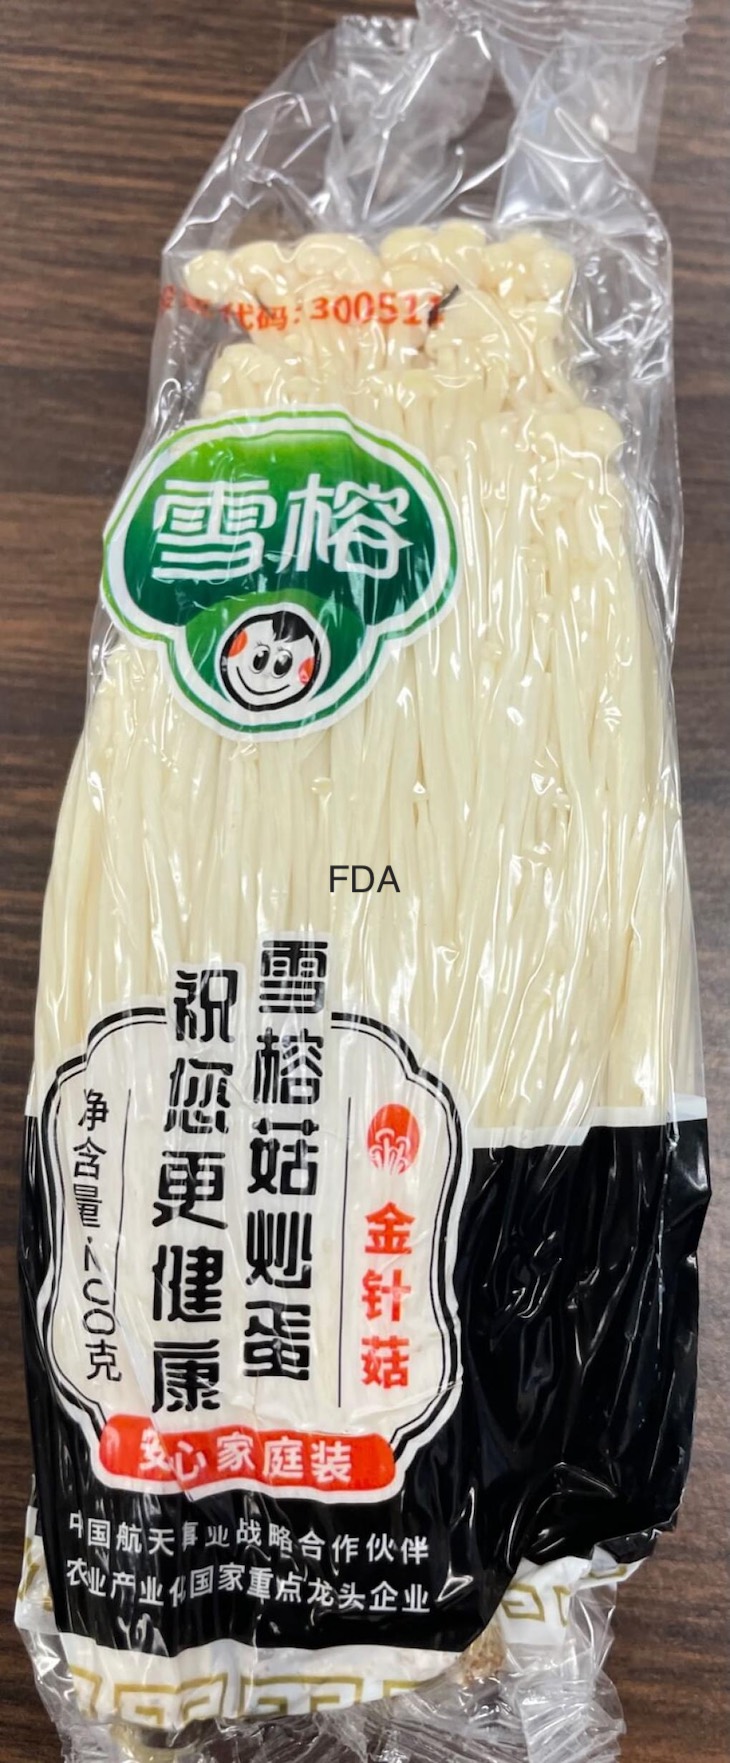 All Golden Medal Enoki Mushrooms Recalled and Distribution Suspended